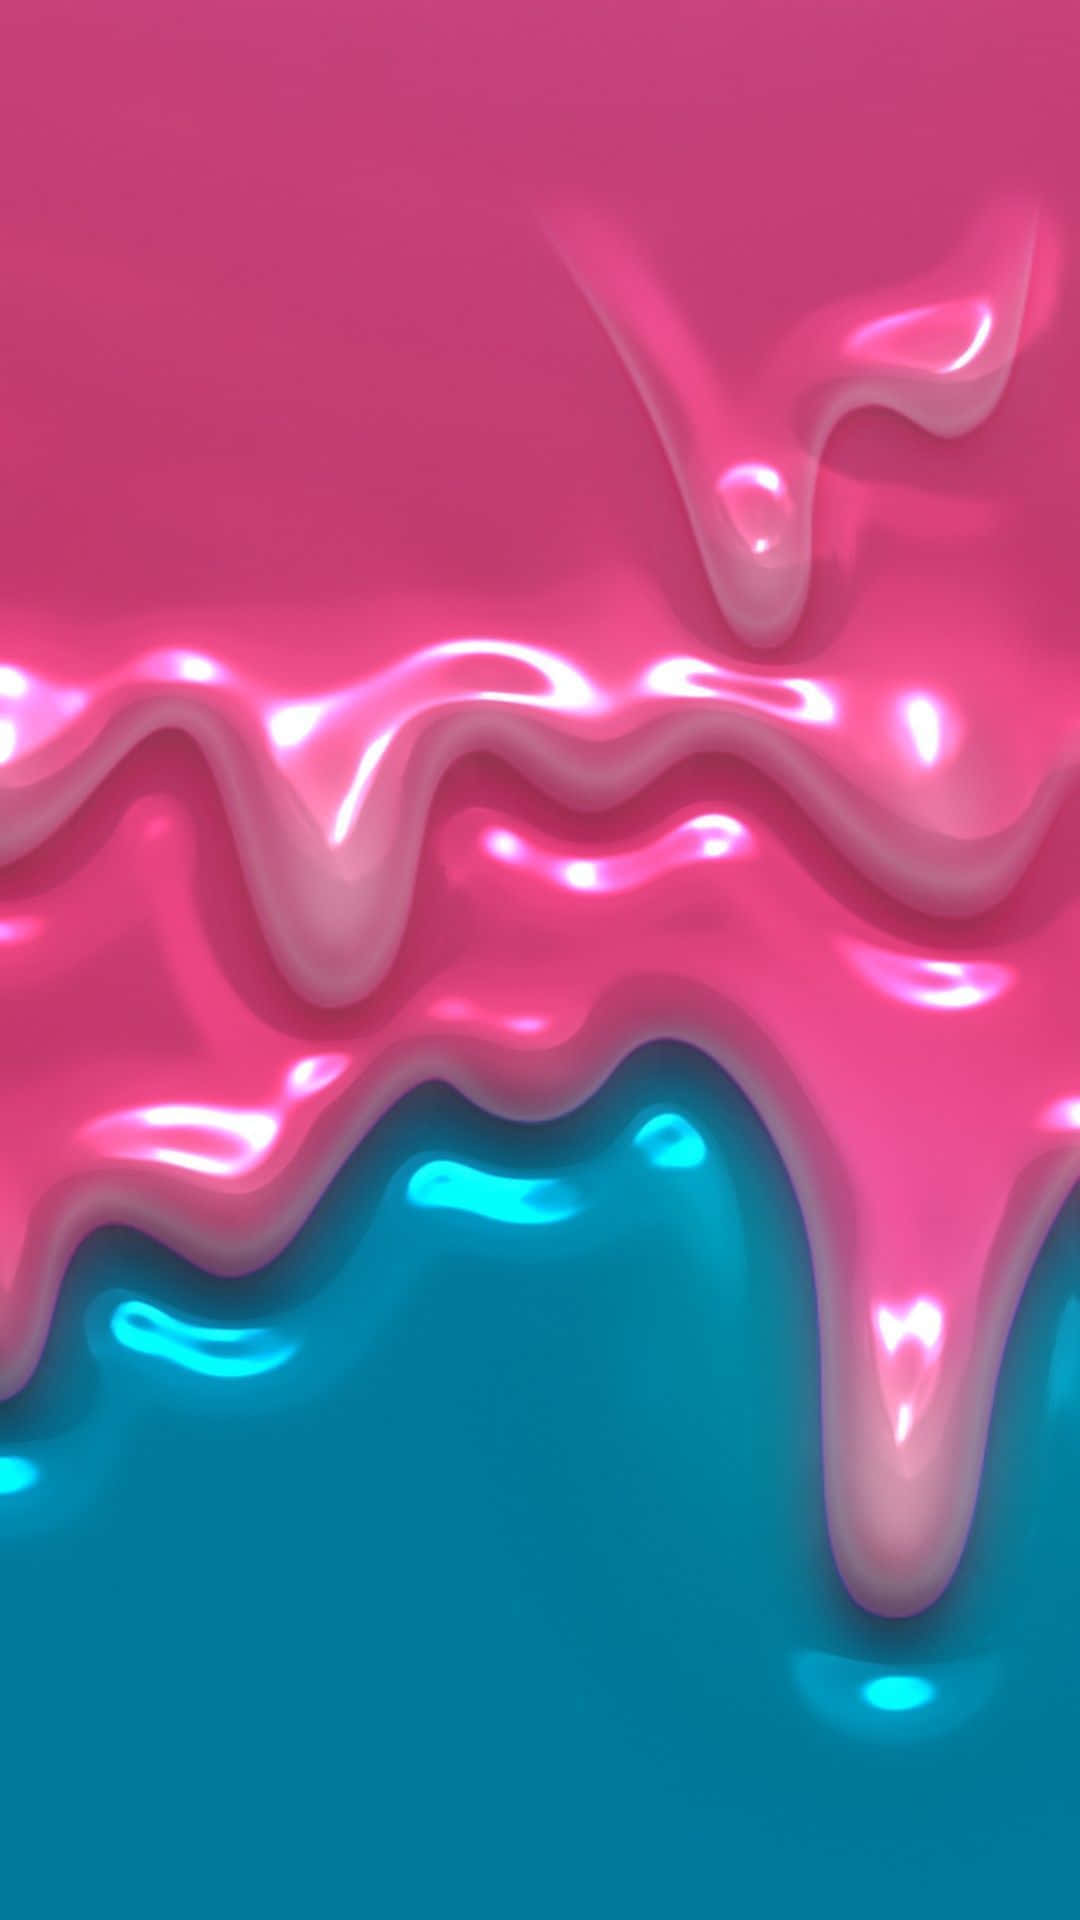 Playful vibes in a 3D Girly world Wallpaper